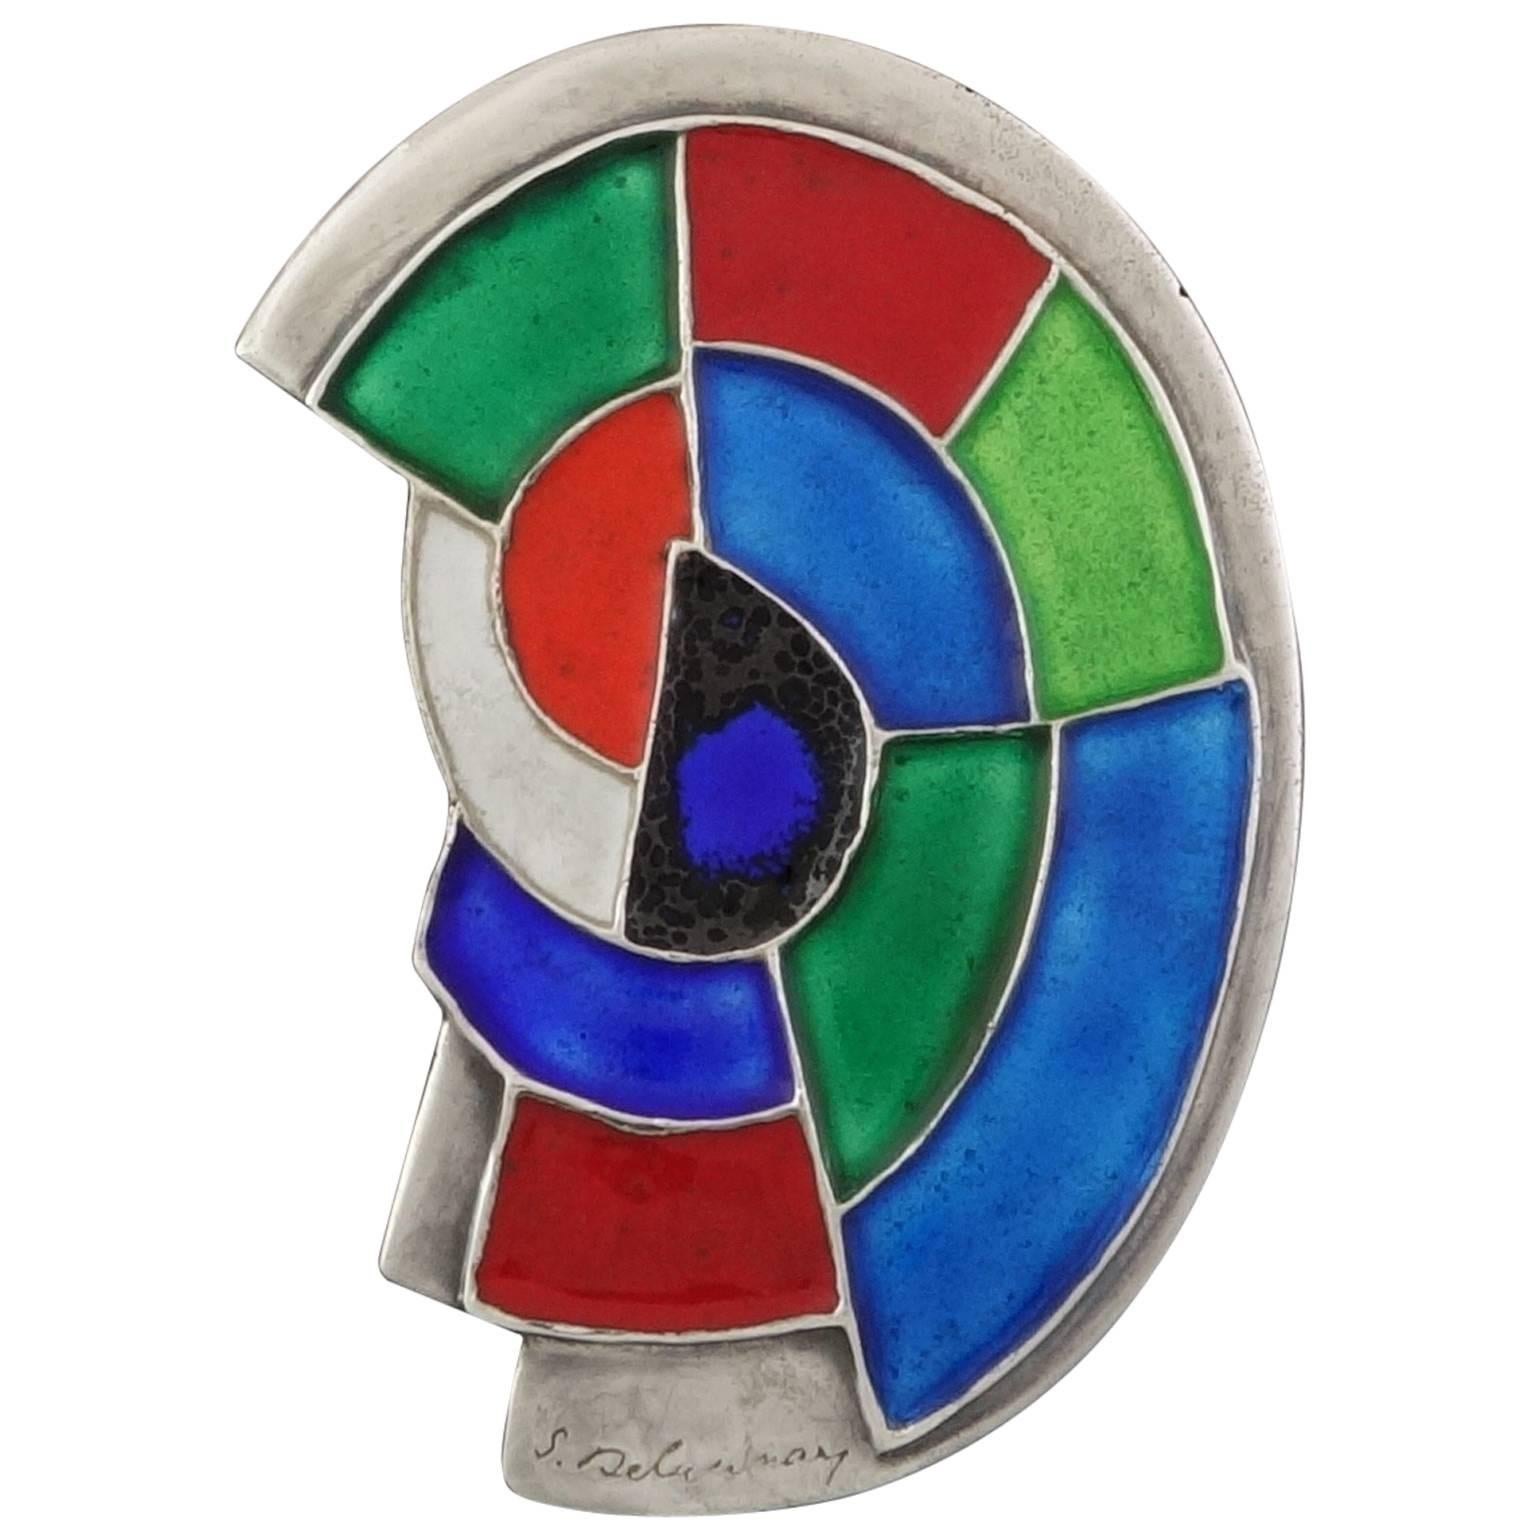 1979 Sonia Delaunay France "Abstraction" Enamel Silver Pendant  For Sale